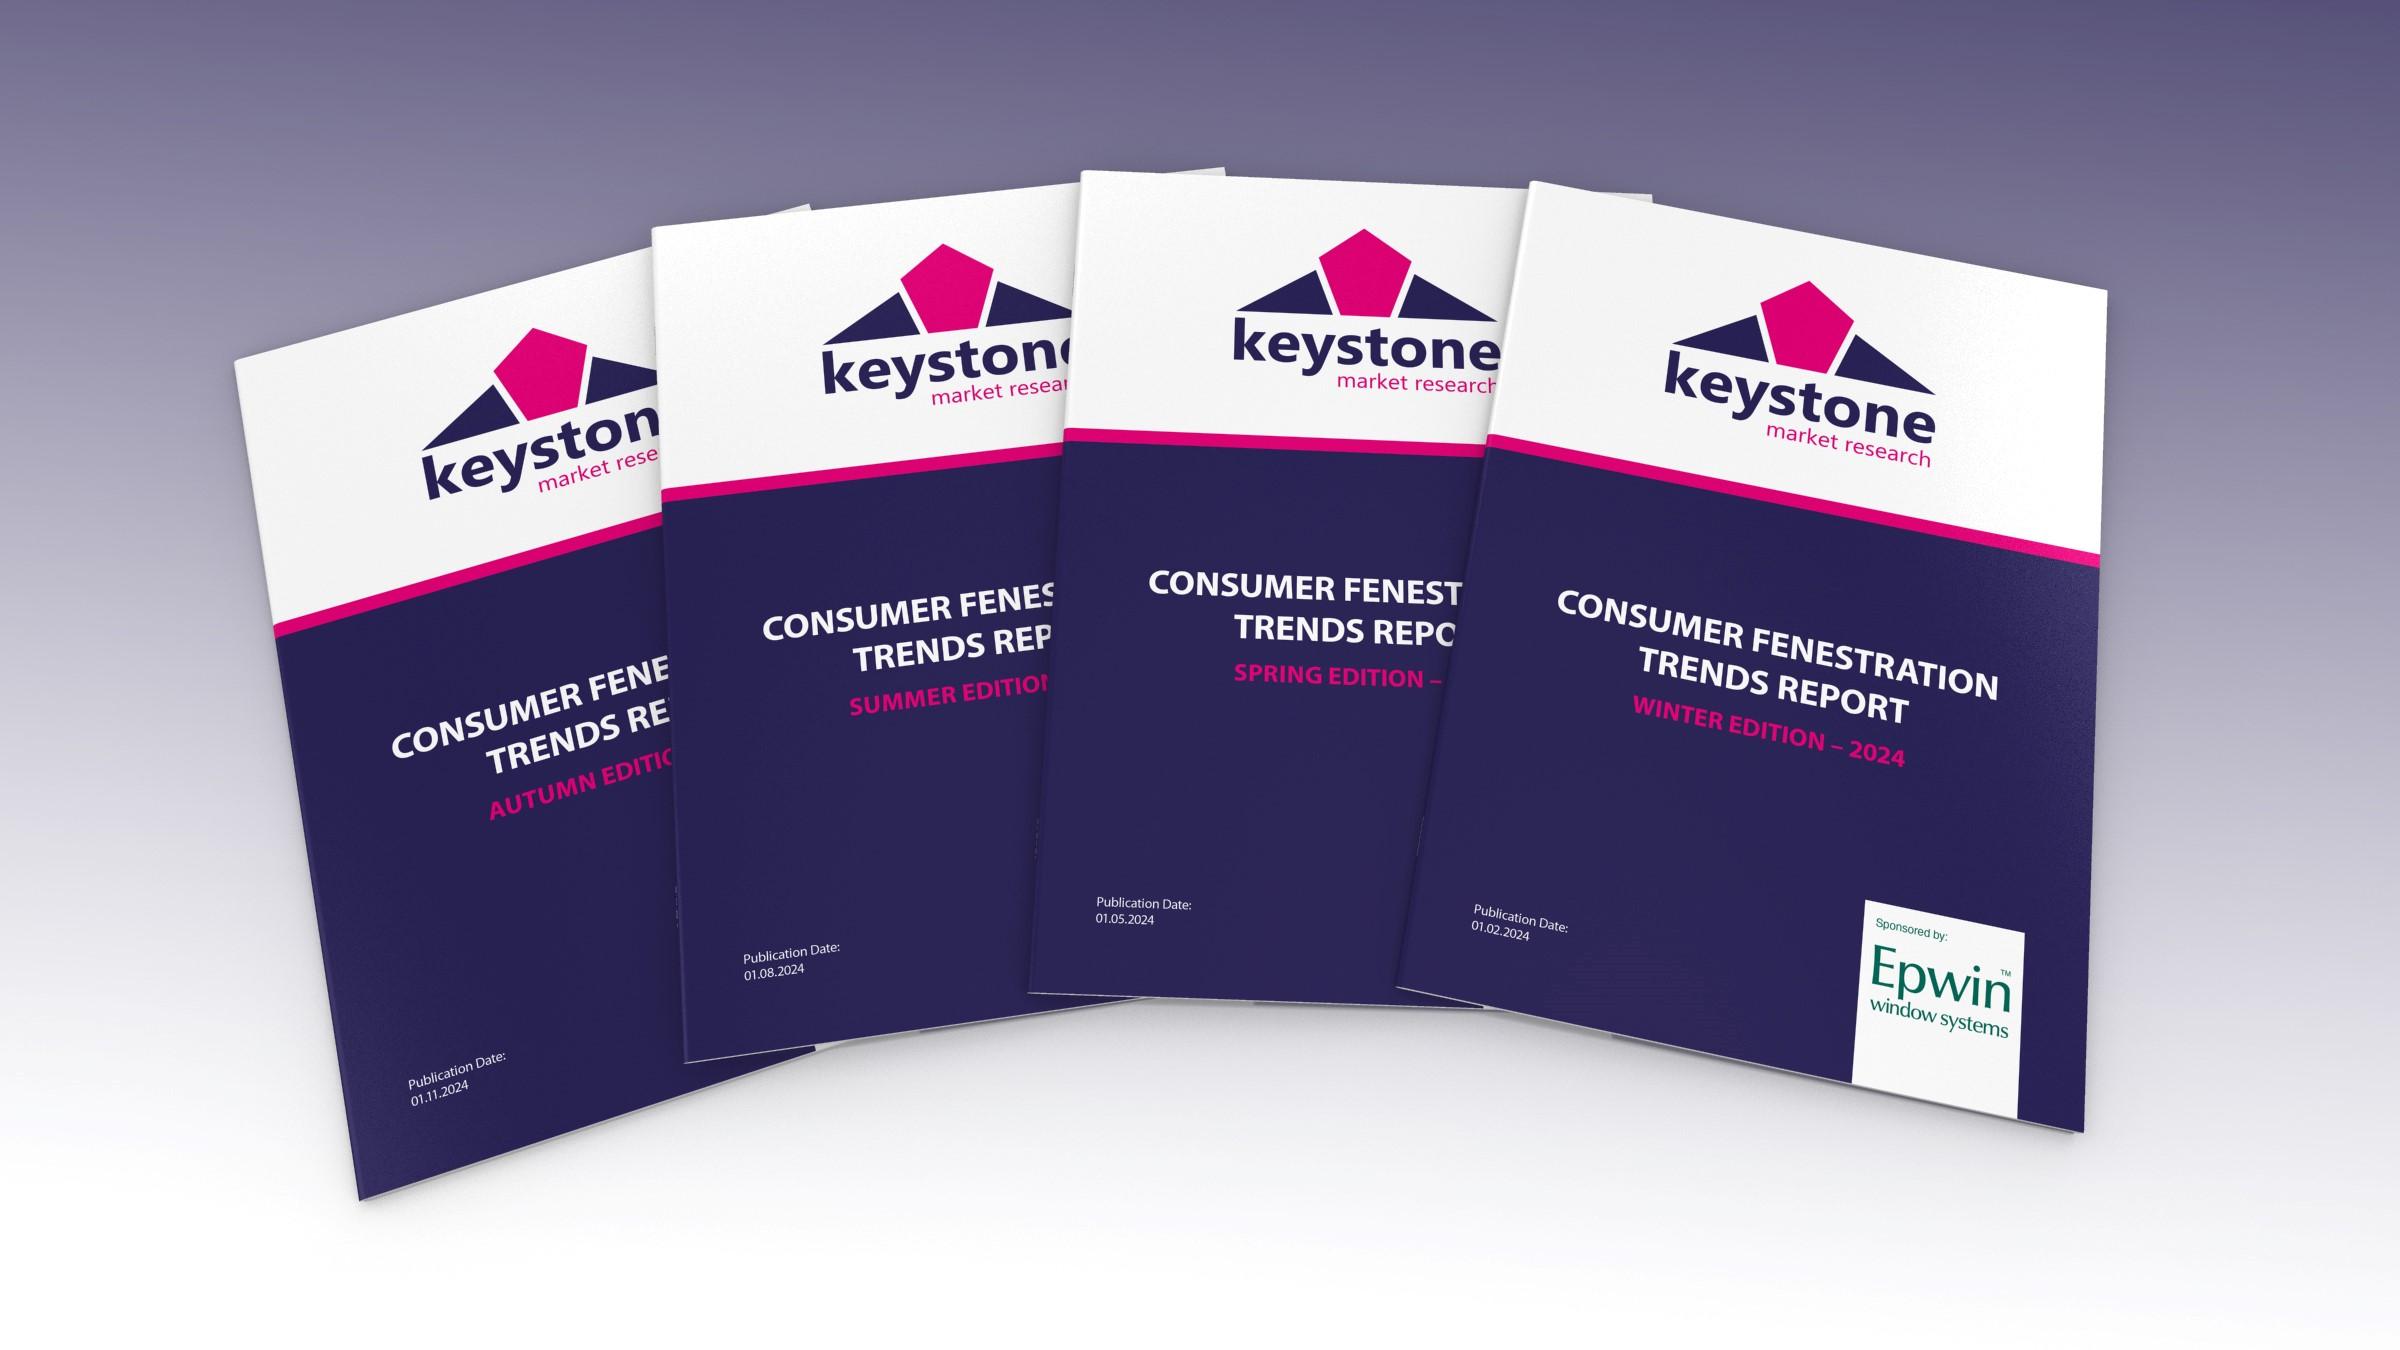 Keystone Launches Groundbreaking UK Consumer Fenestration Trends Report, Sponsored by Epwin Window Systems